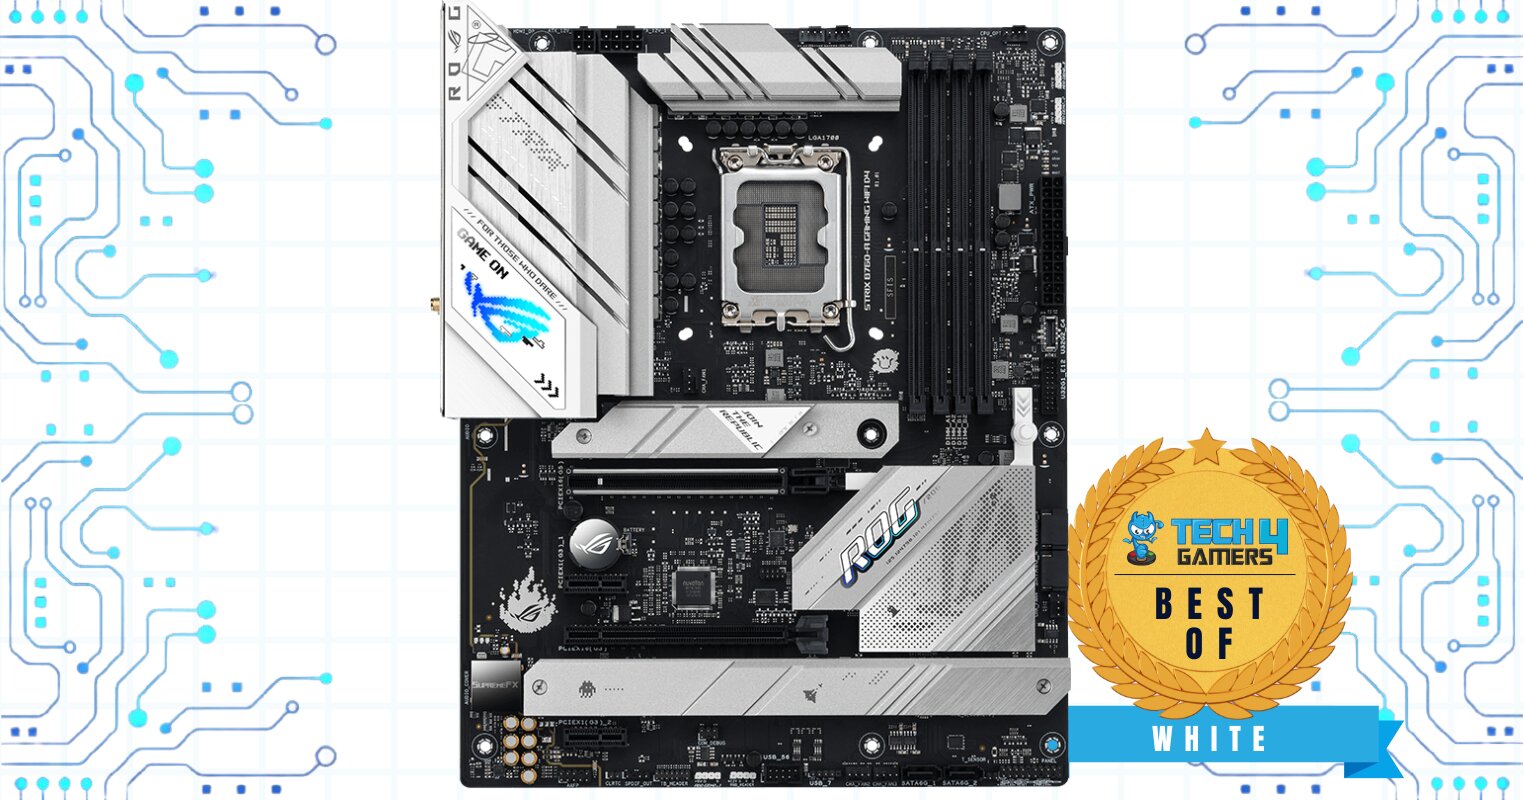 Best White B760 Motherboard — ASUS ROG Strix B760-A Gaming WiFi D4